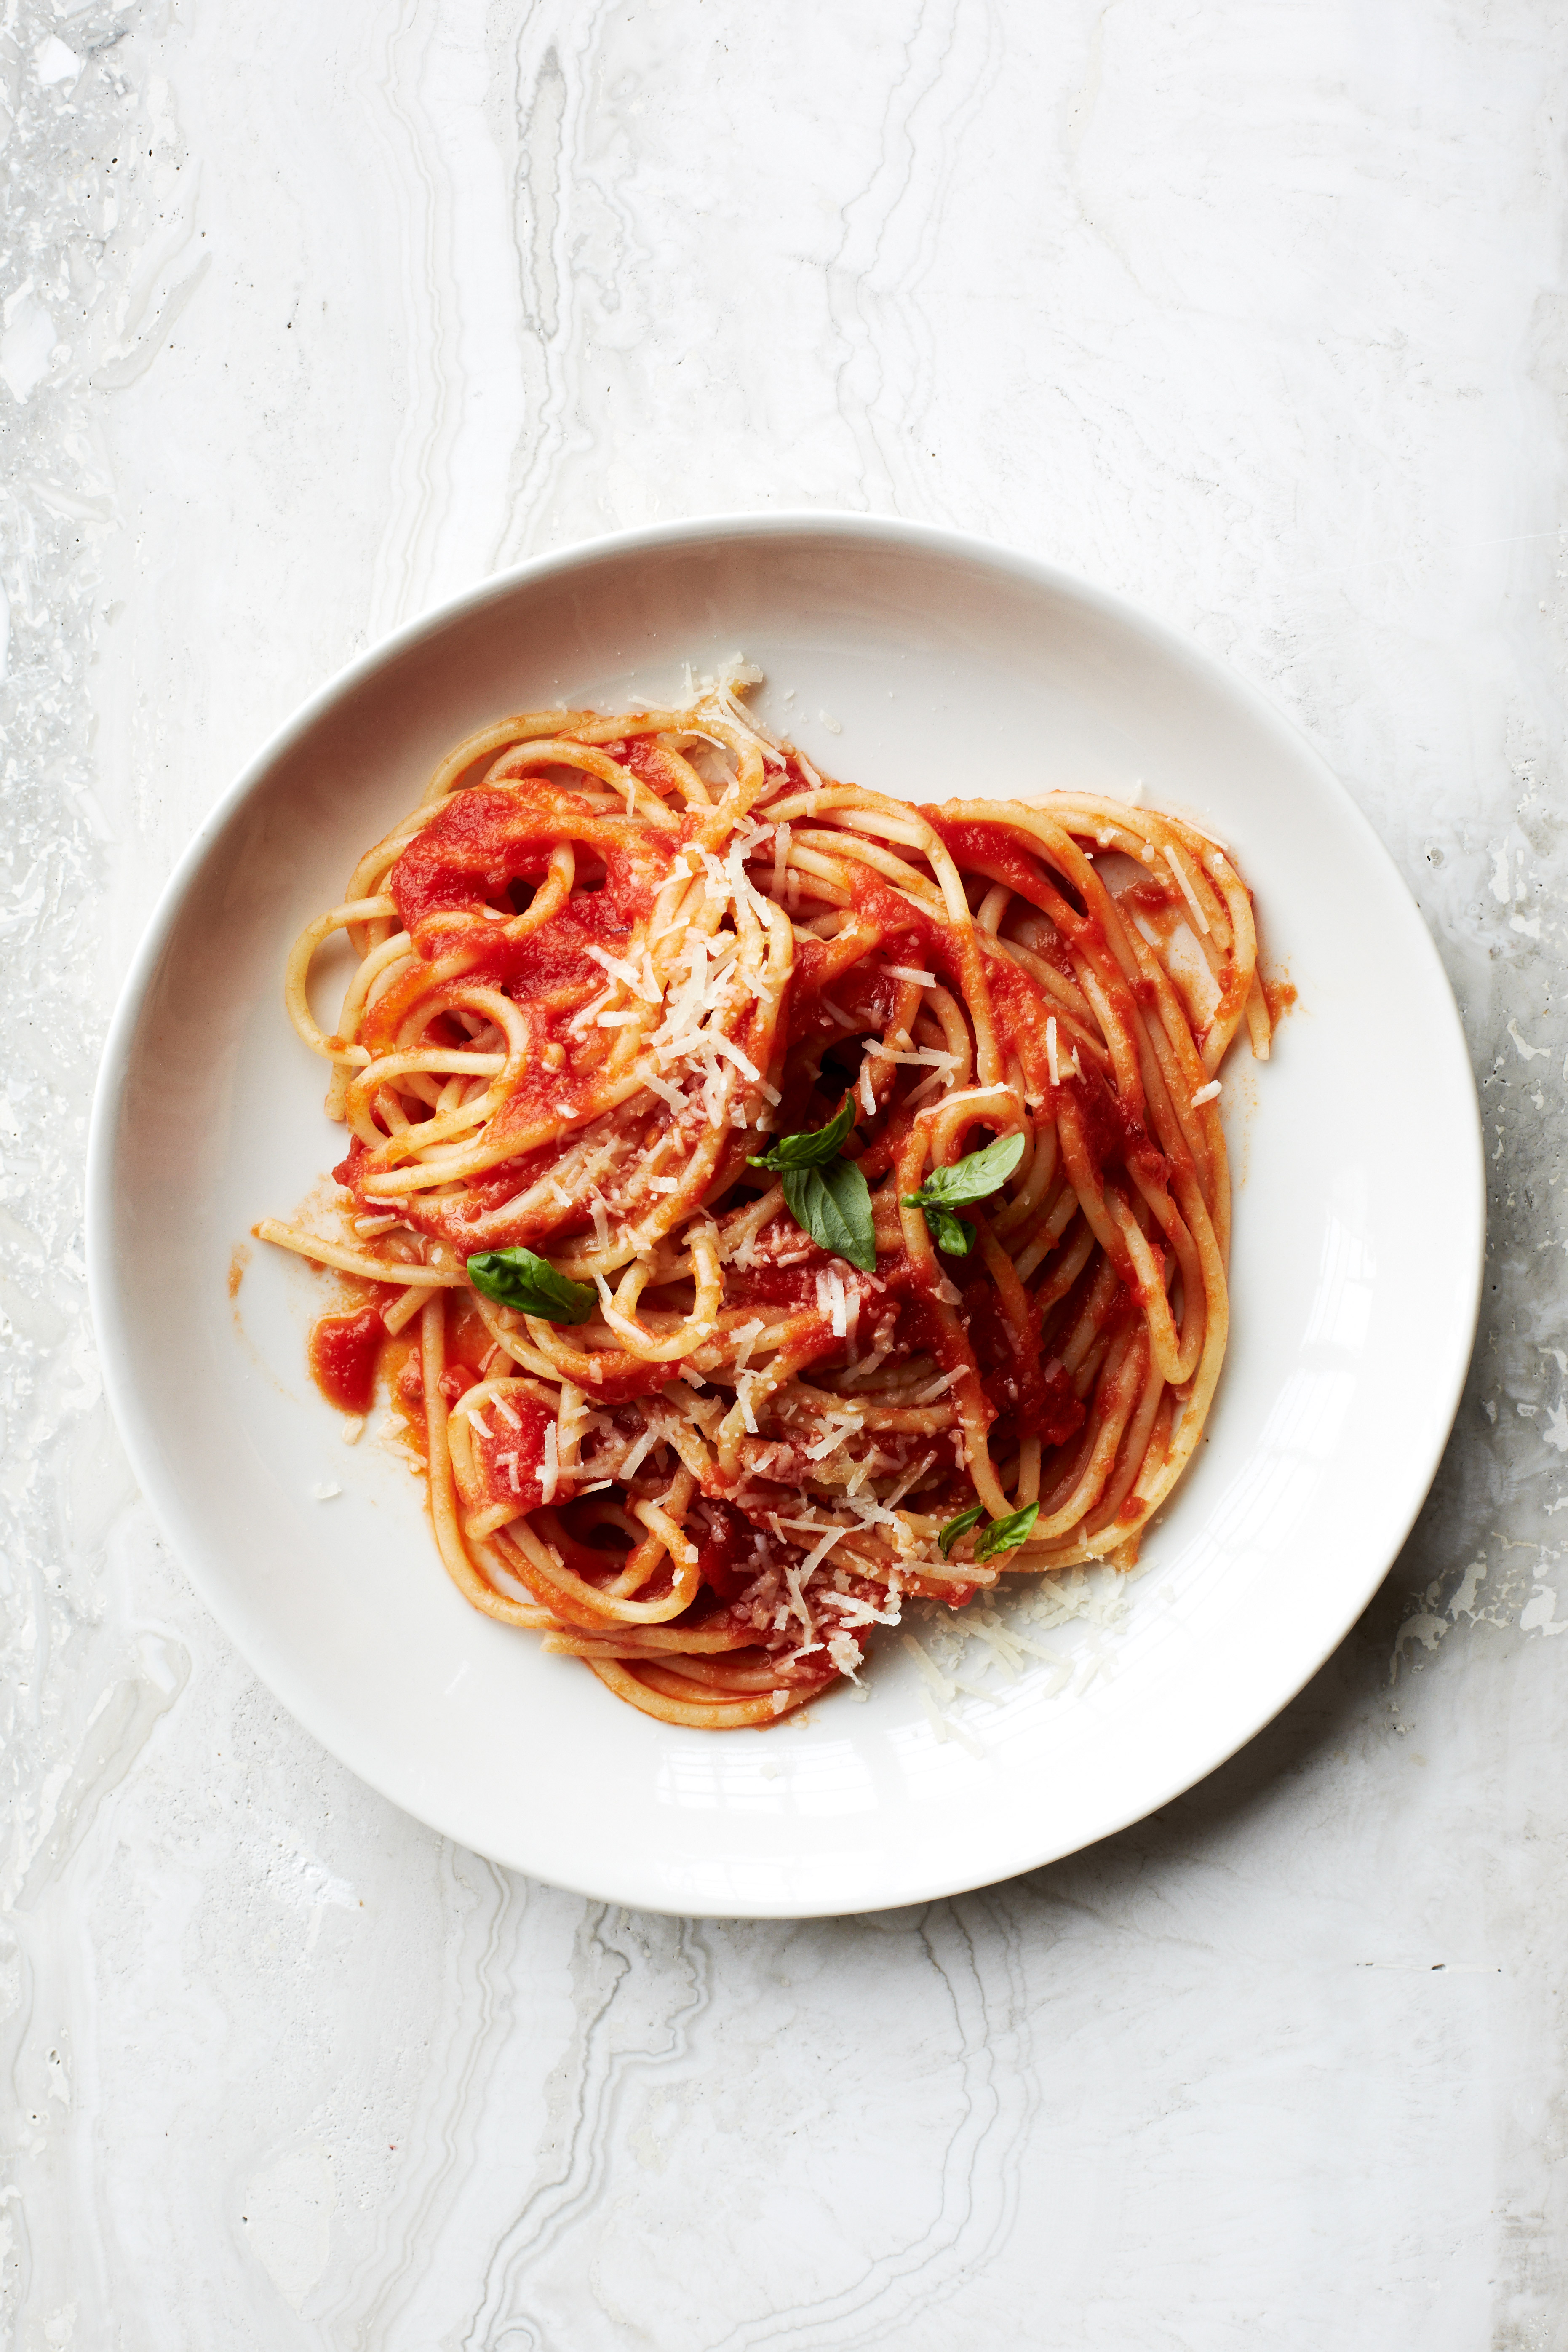 Sauce-Simmered Spaghetti al Pomodoro
                              Top Chef finalist Sarah Grueneberg cooks parboiled spaghetti right in the tomato sauce so it becomes infused with flavor.
                              Recipe